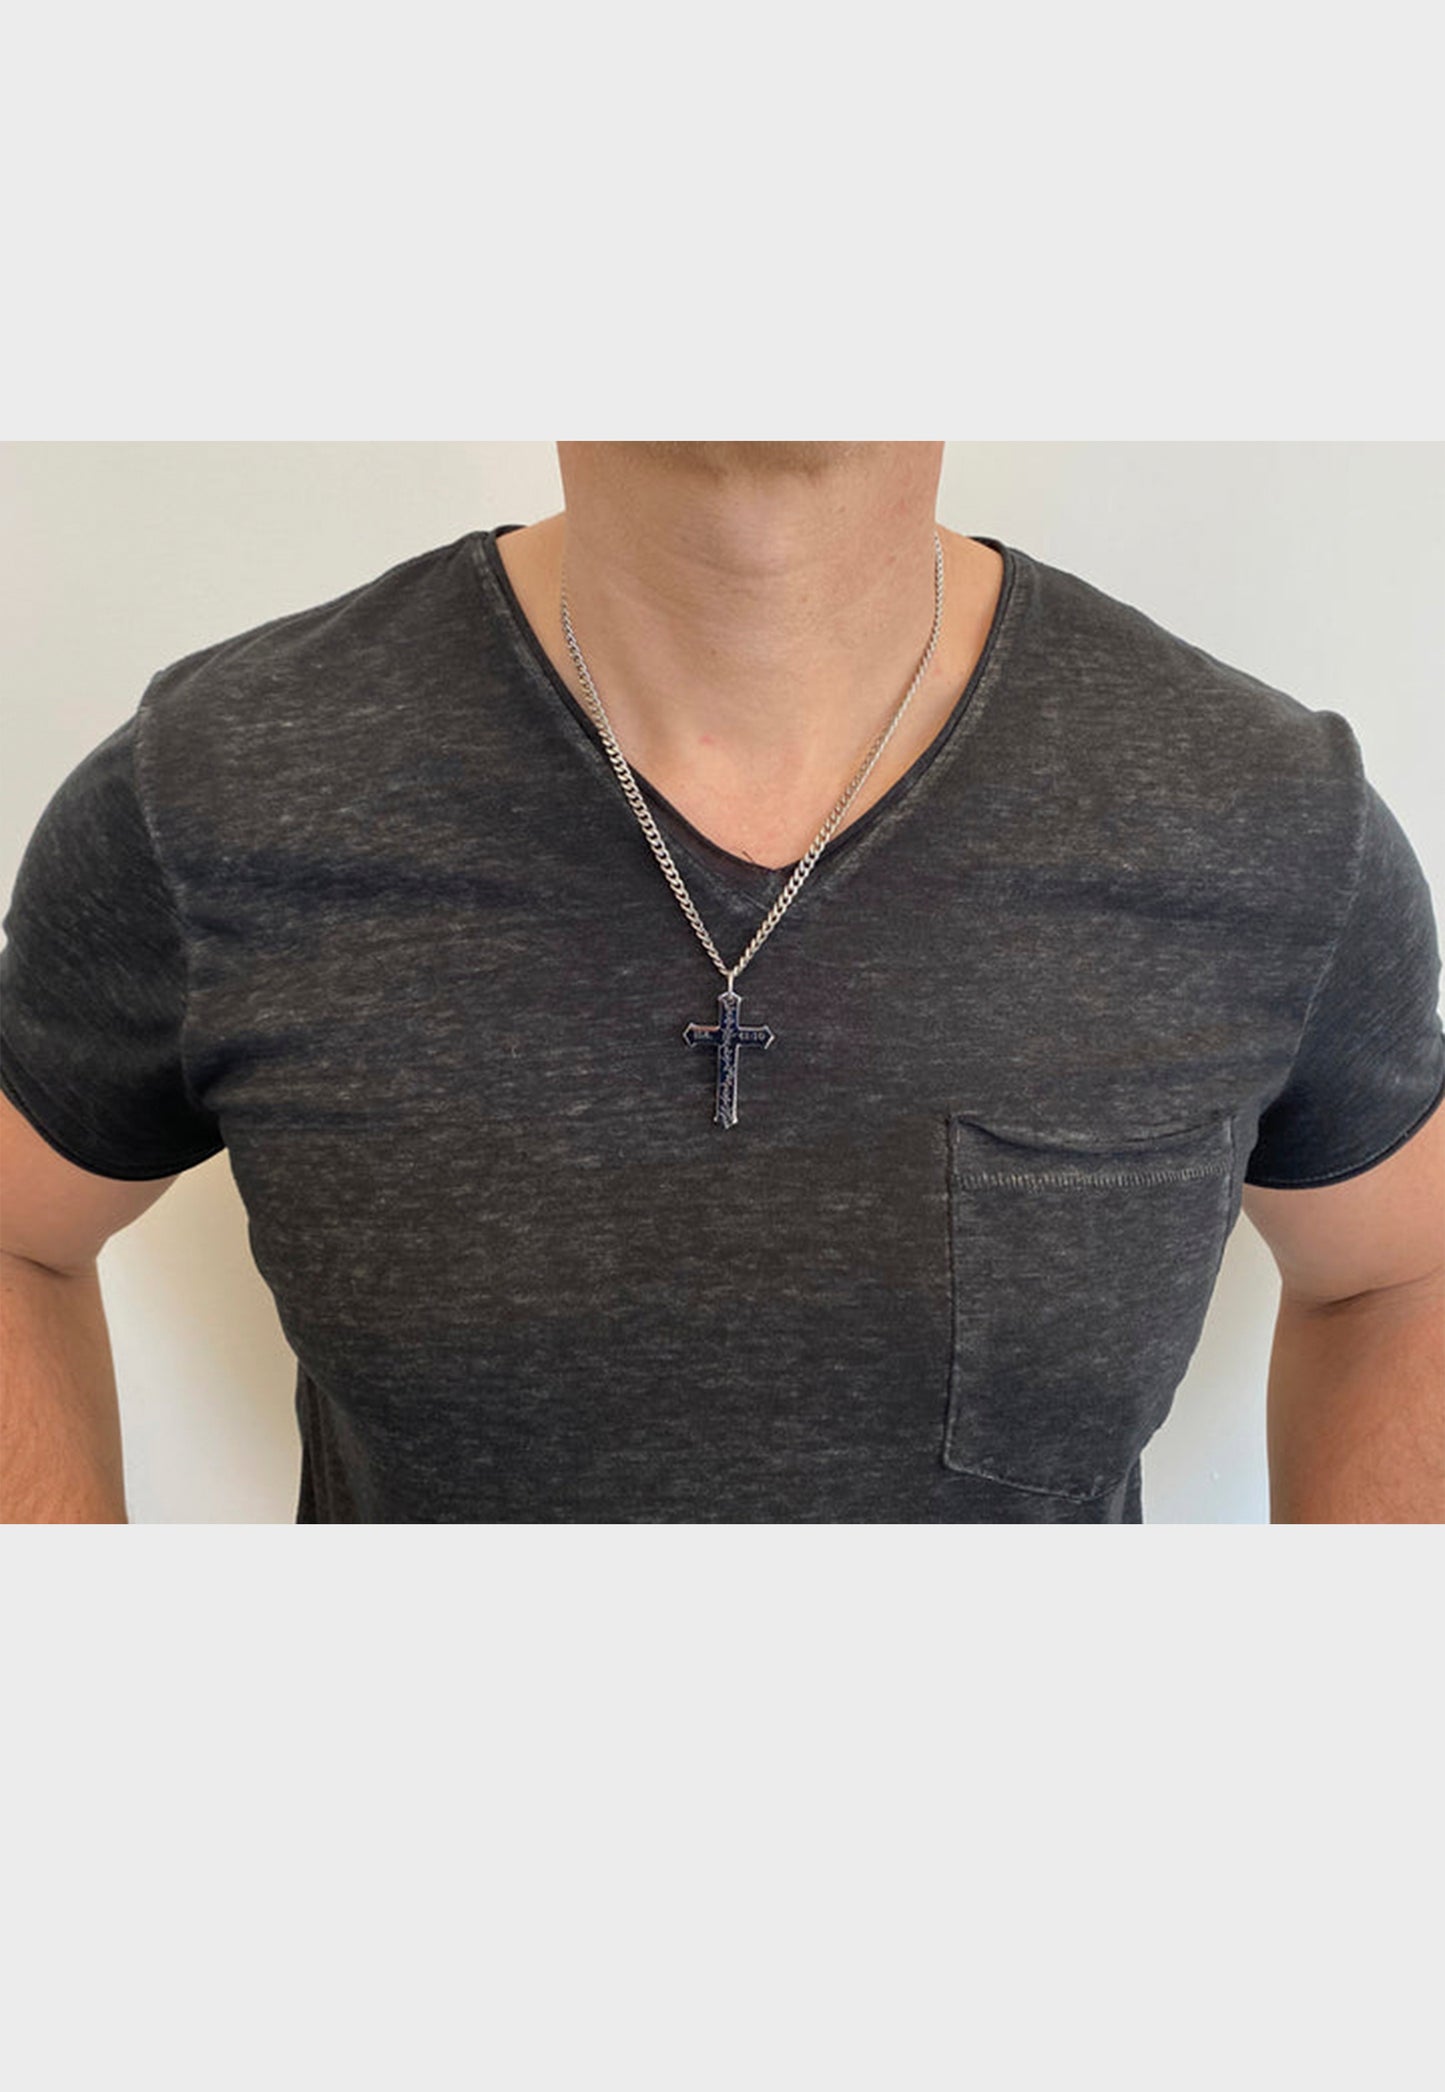 Christian necklace on male model